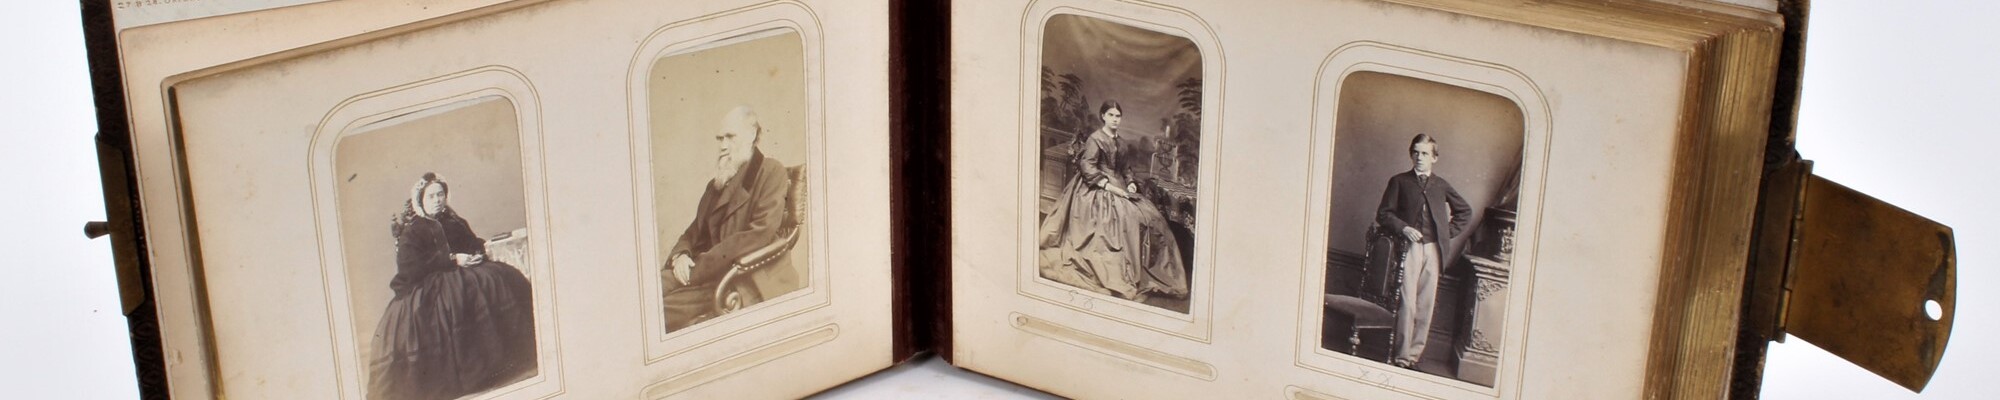 Newly discovered Charles Darwin family album comes to auction